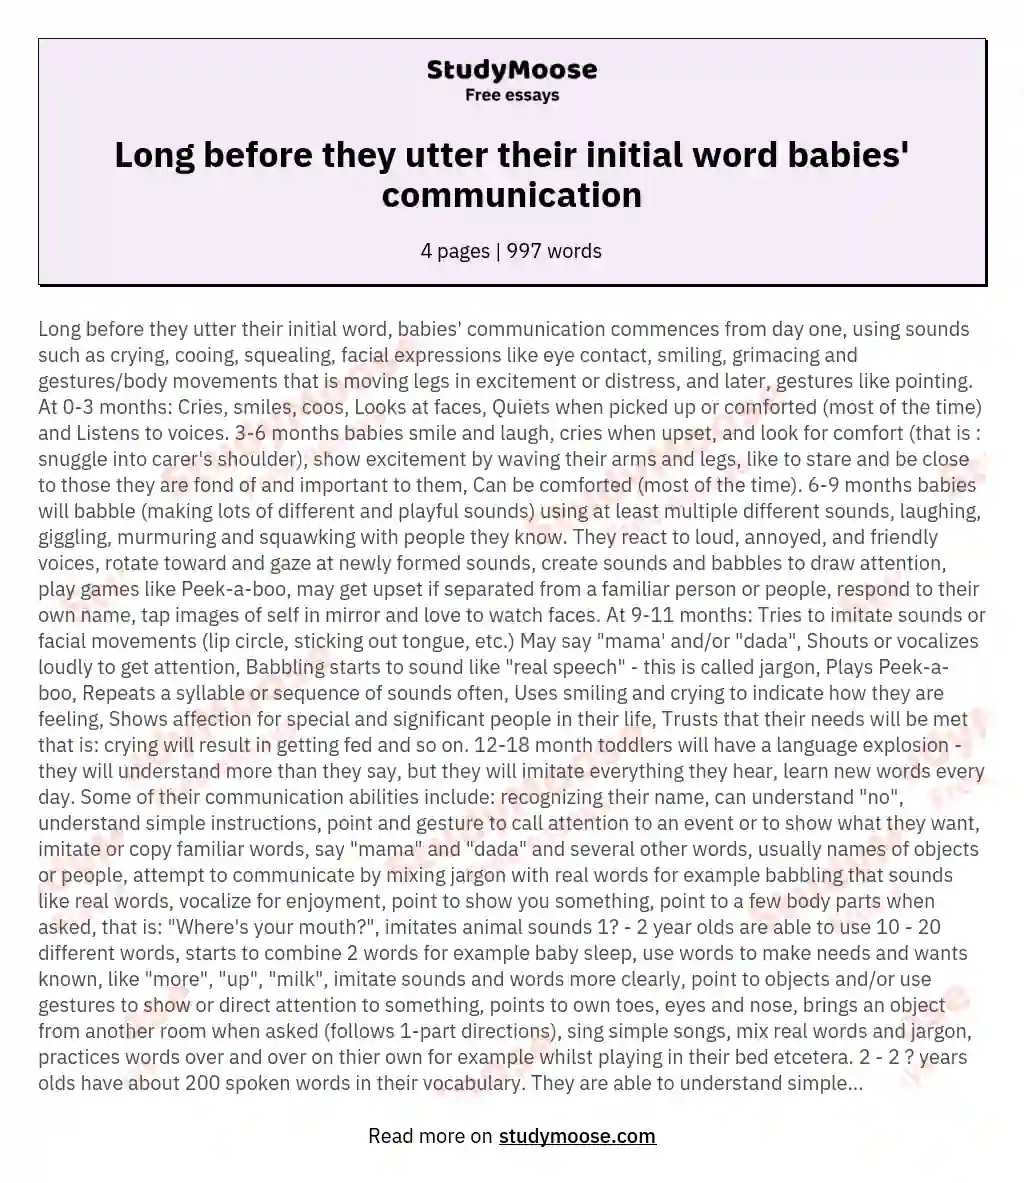 Long before they utter their initial word babies' communication